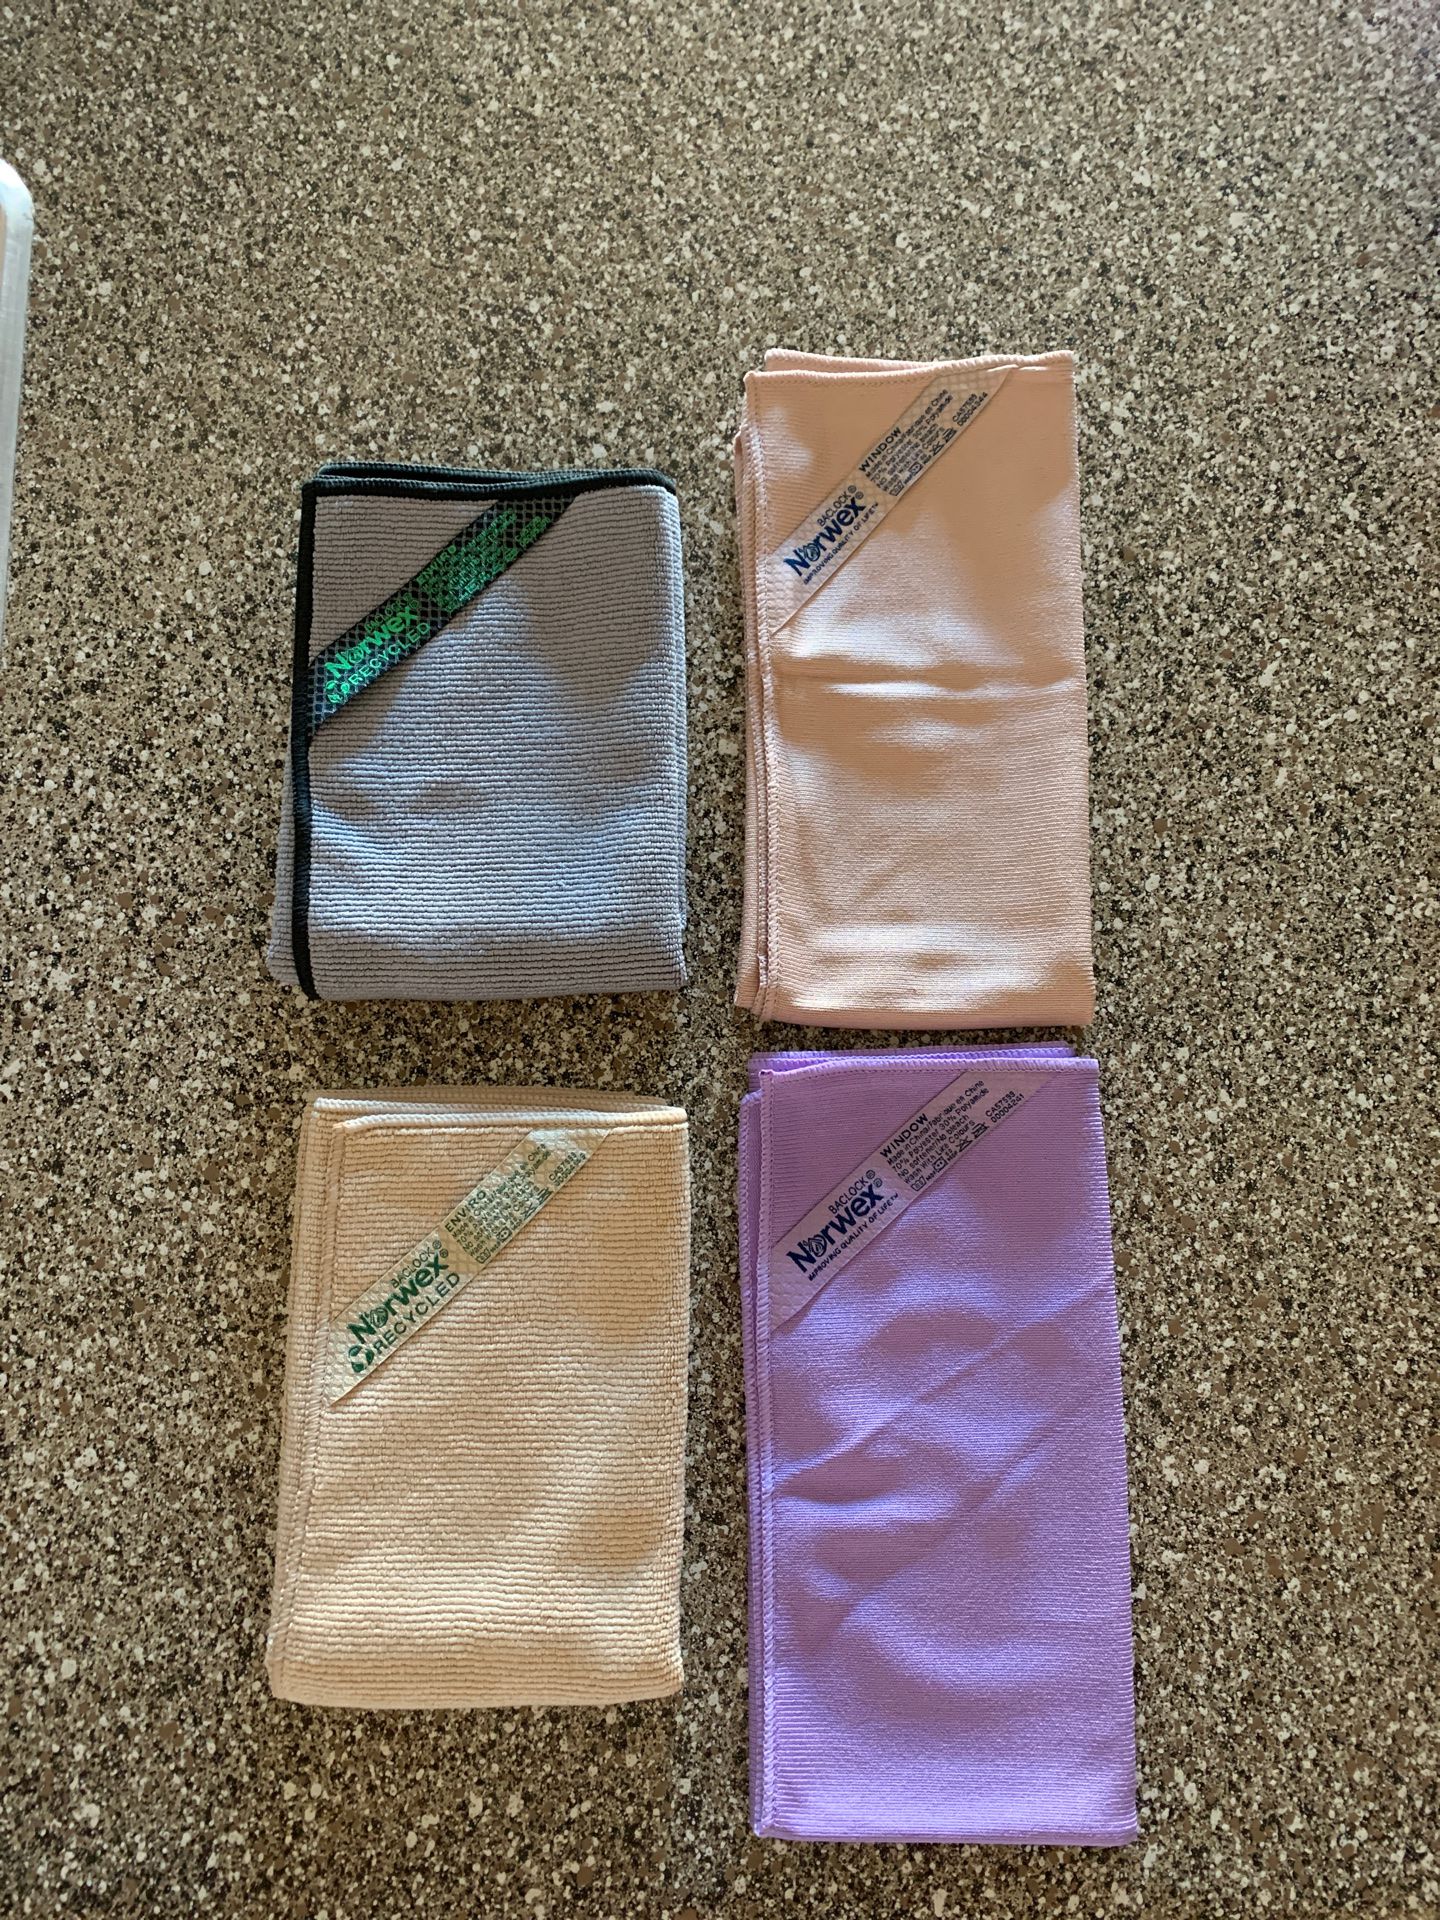 Norwex Window Cloth (2) and EnviroCloth (2)